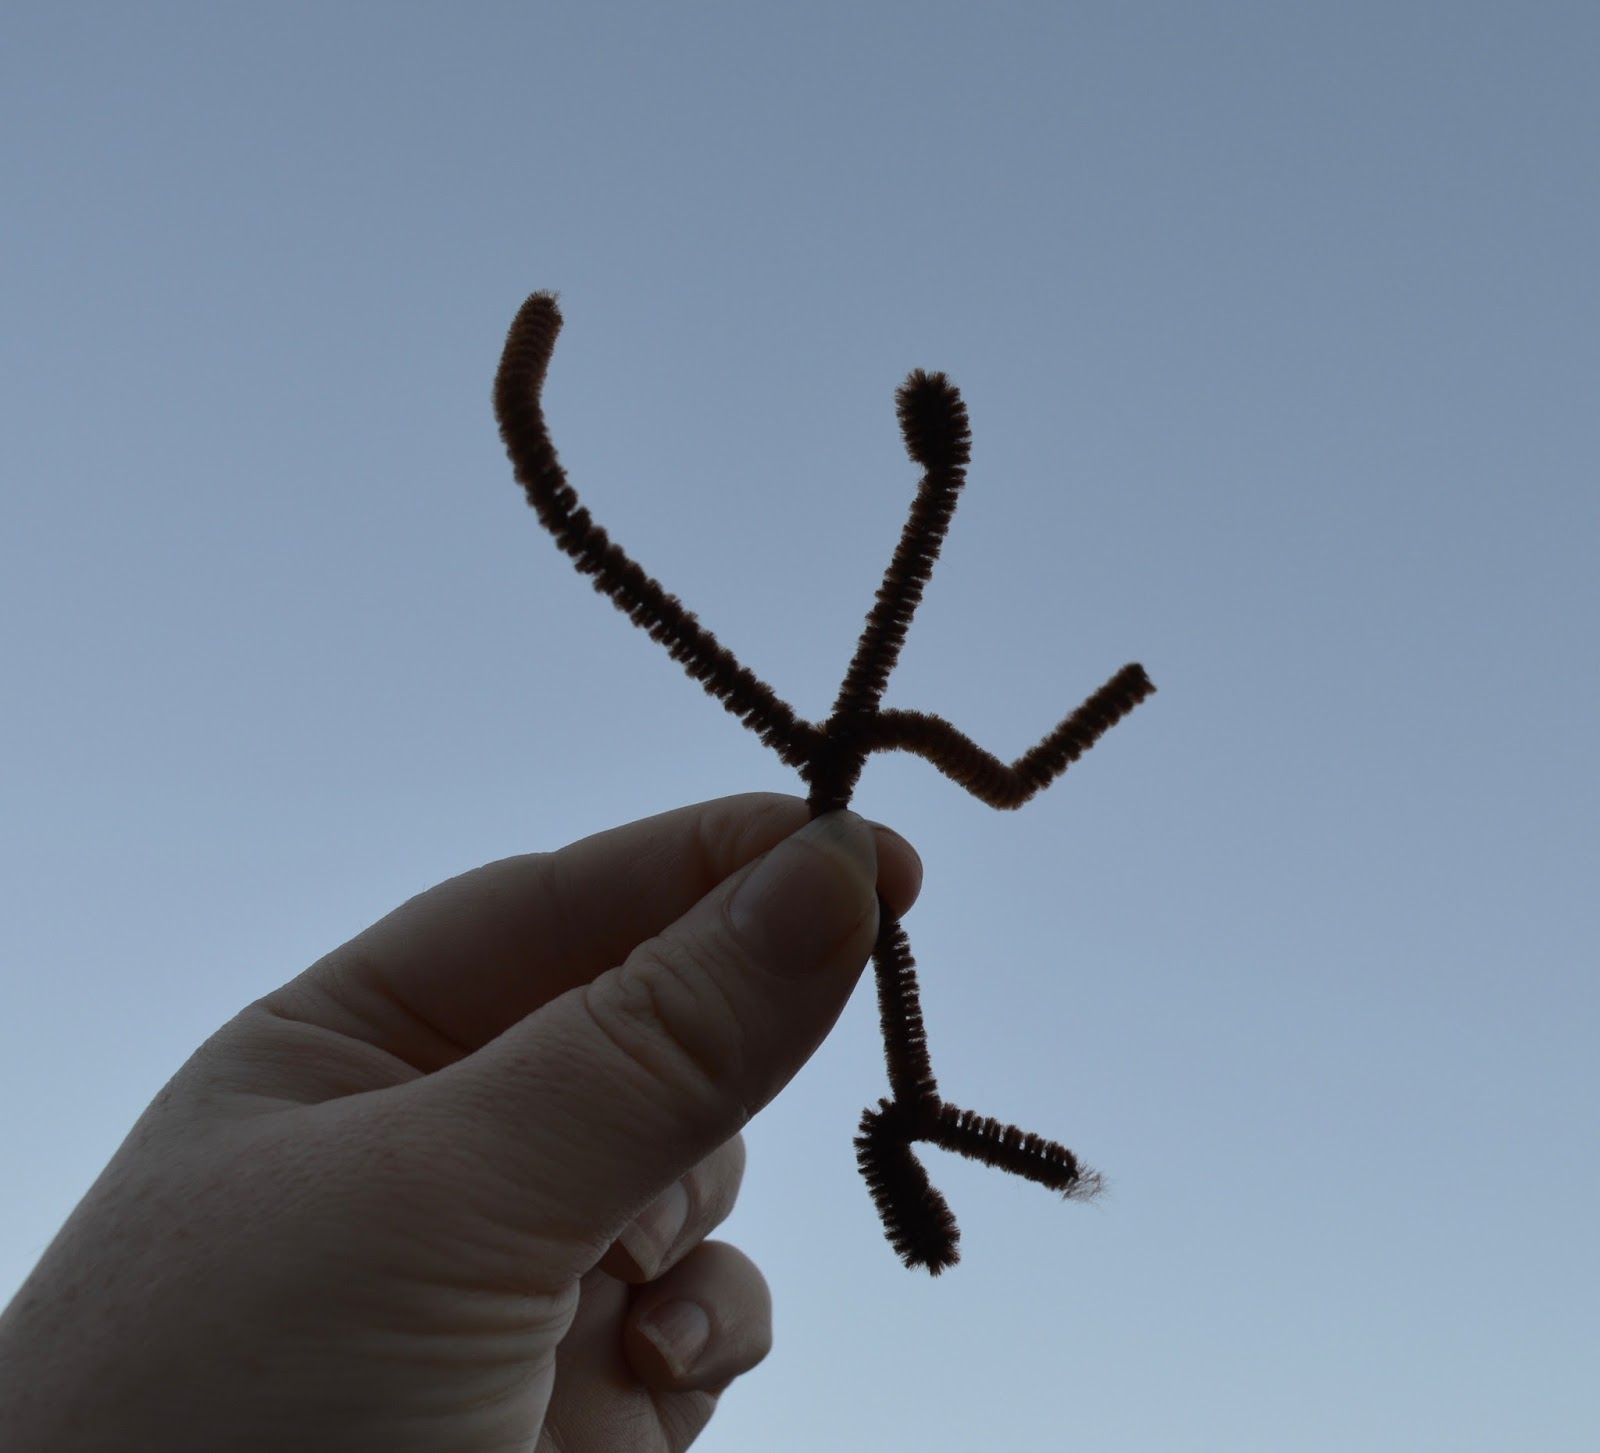 Stick man creation with pipecleaners